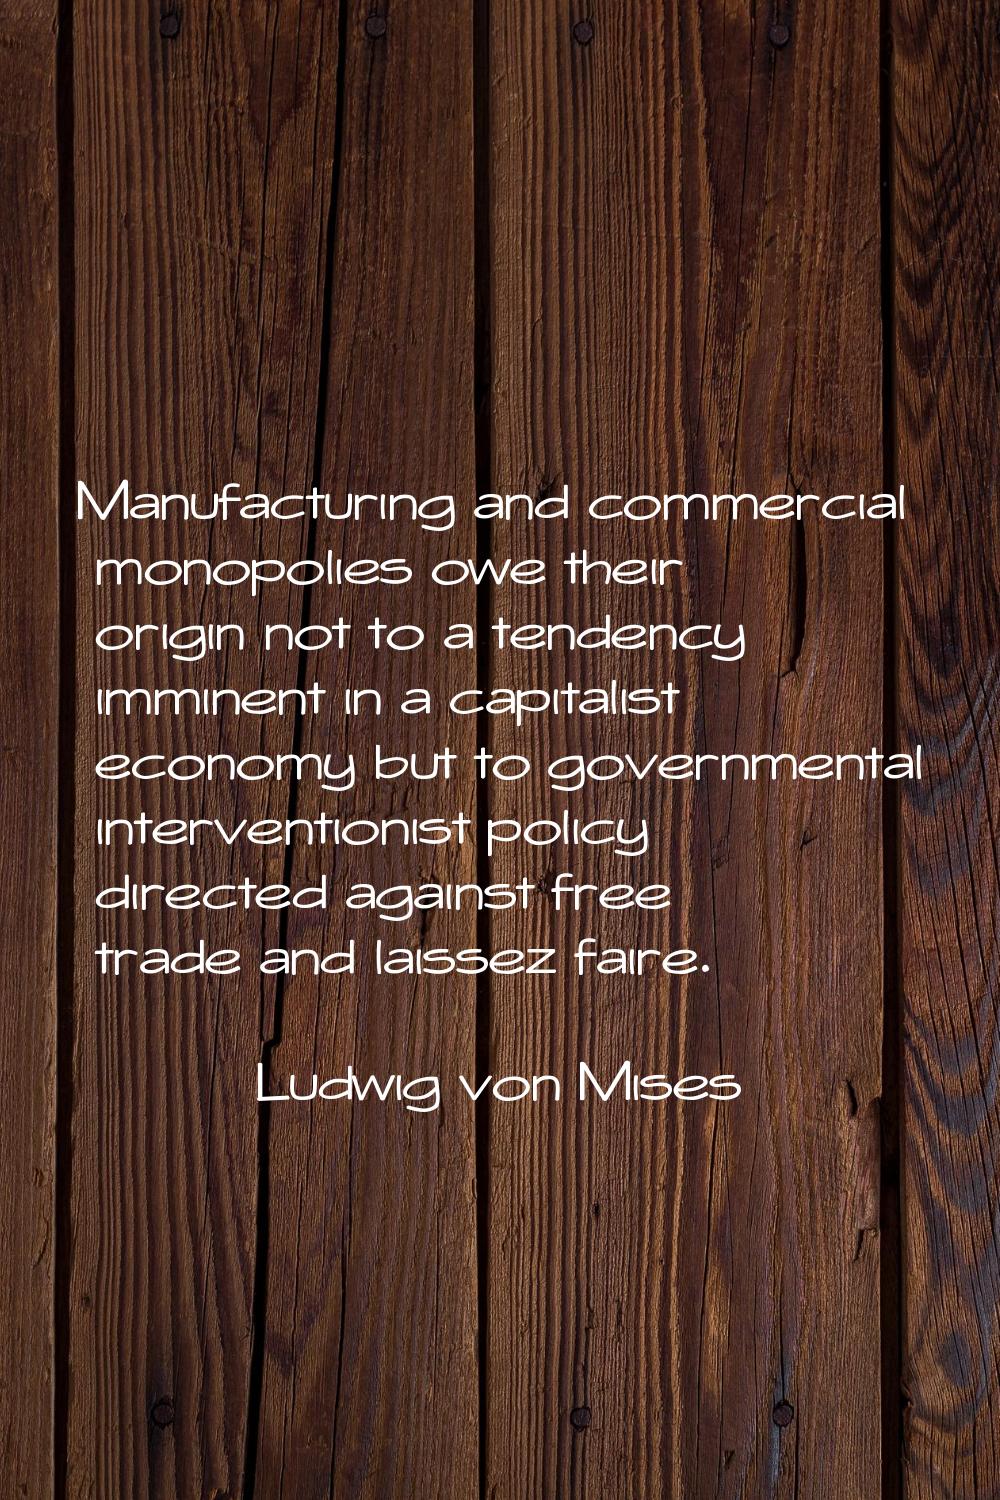 Manufacturing and commercial monopolies owe their origin not to a tendency imminent in a capitalist